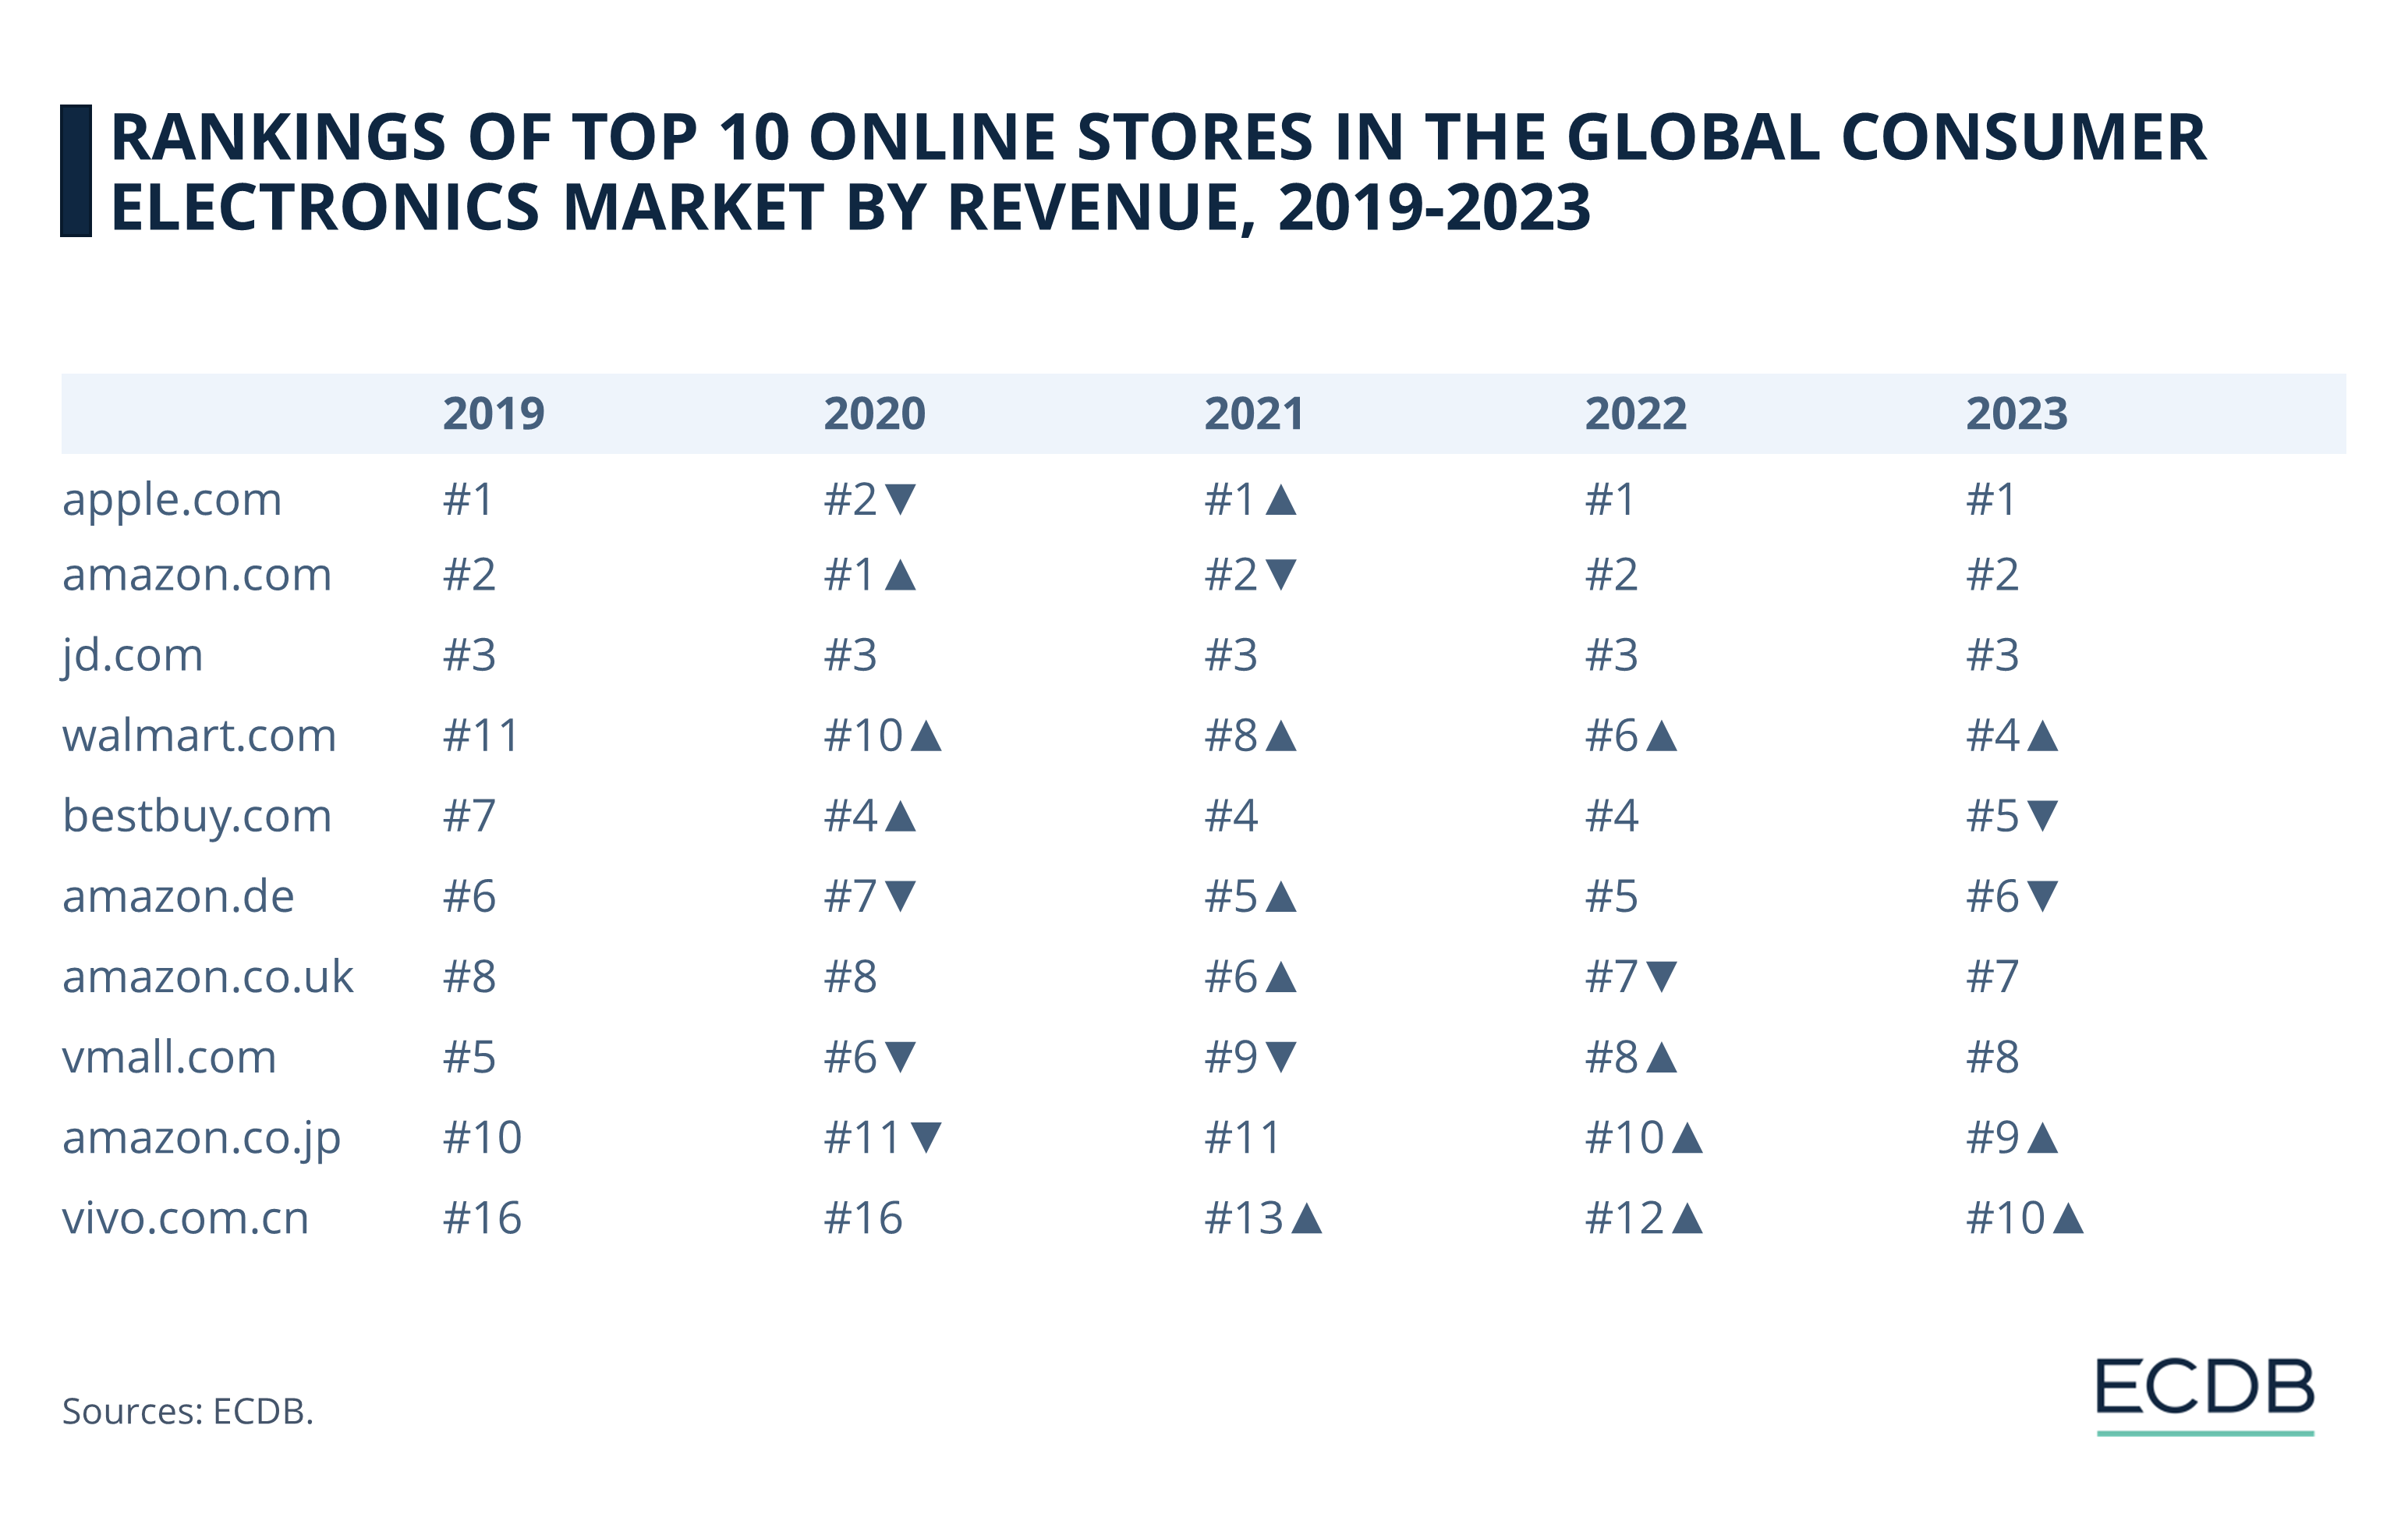 Rankings of Top 10 Online Stores in the Global Consumer Electronics Market by Revenue, 2019-2023